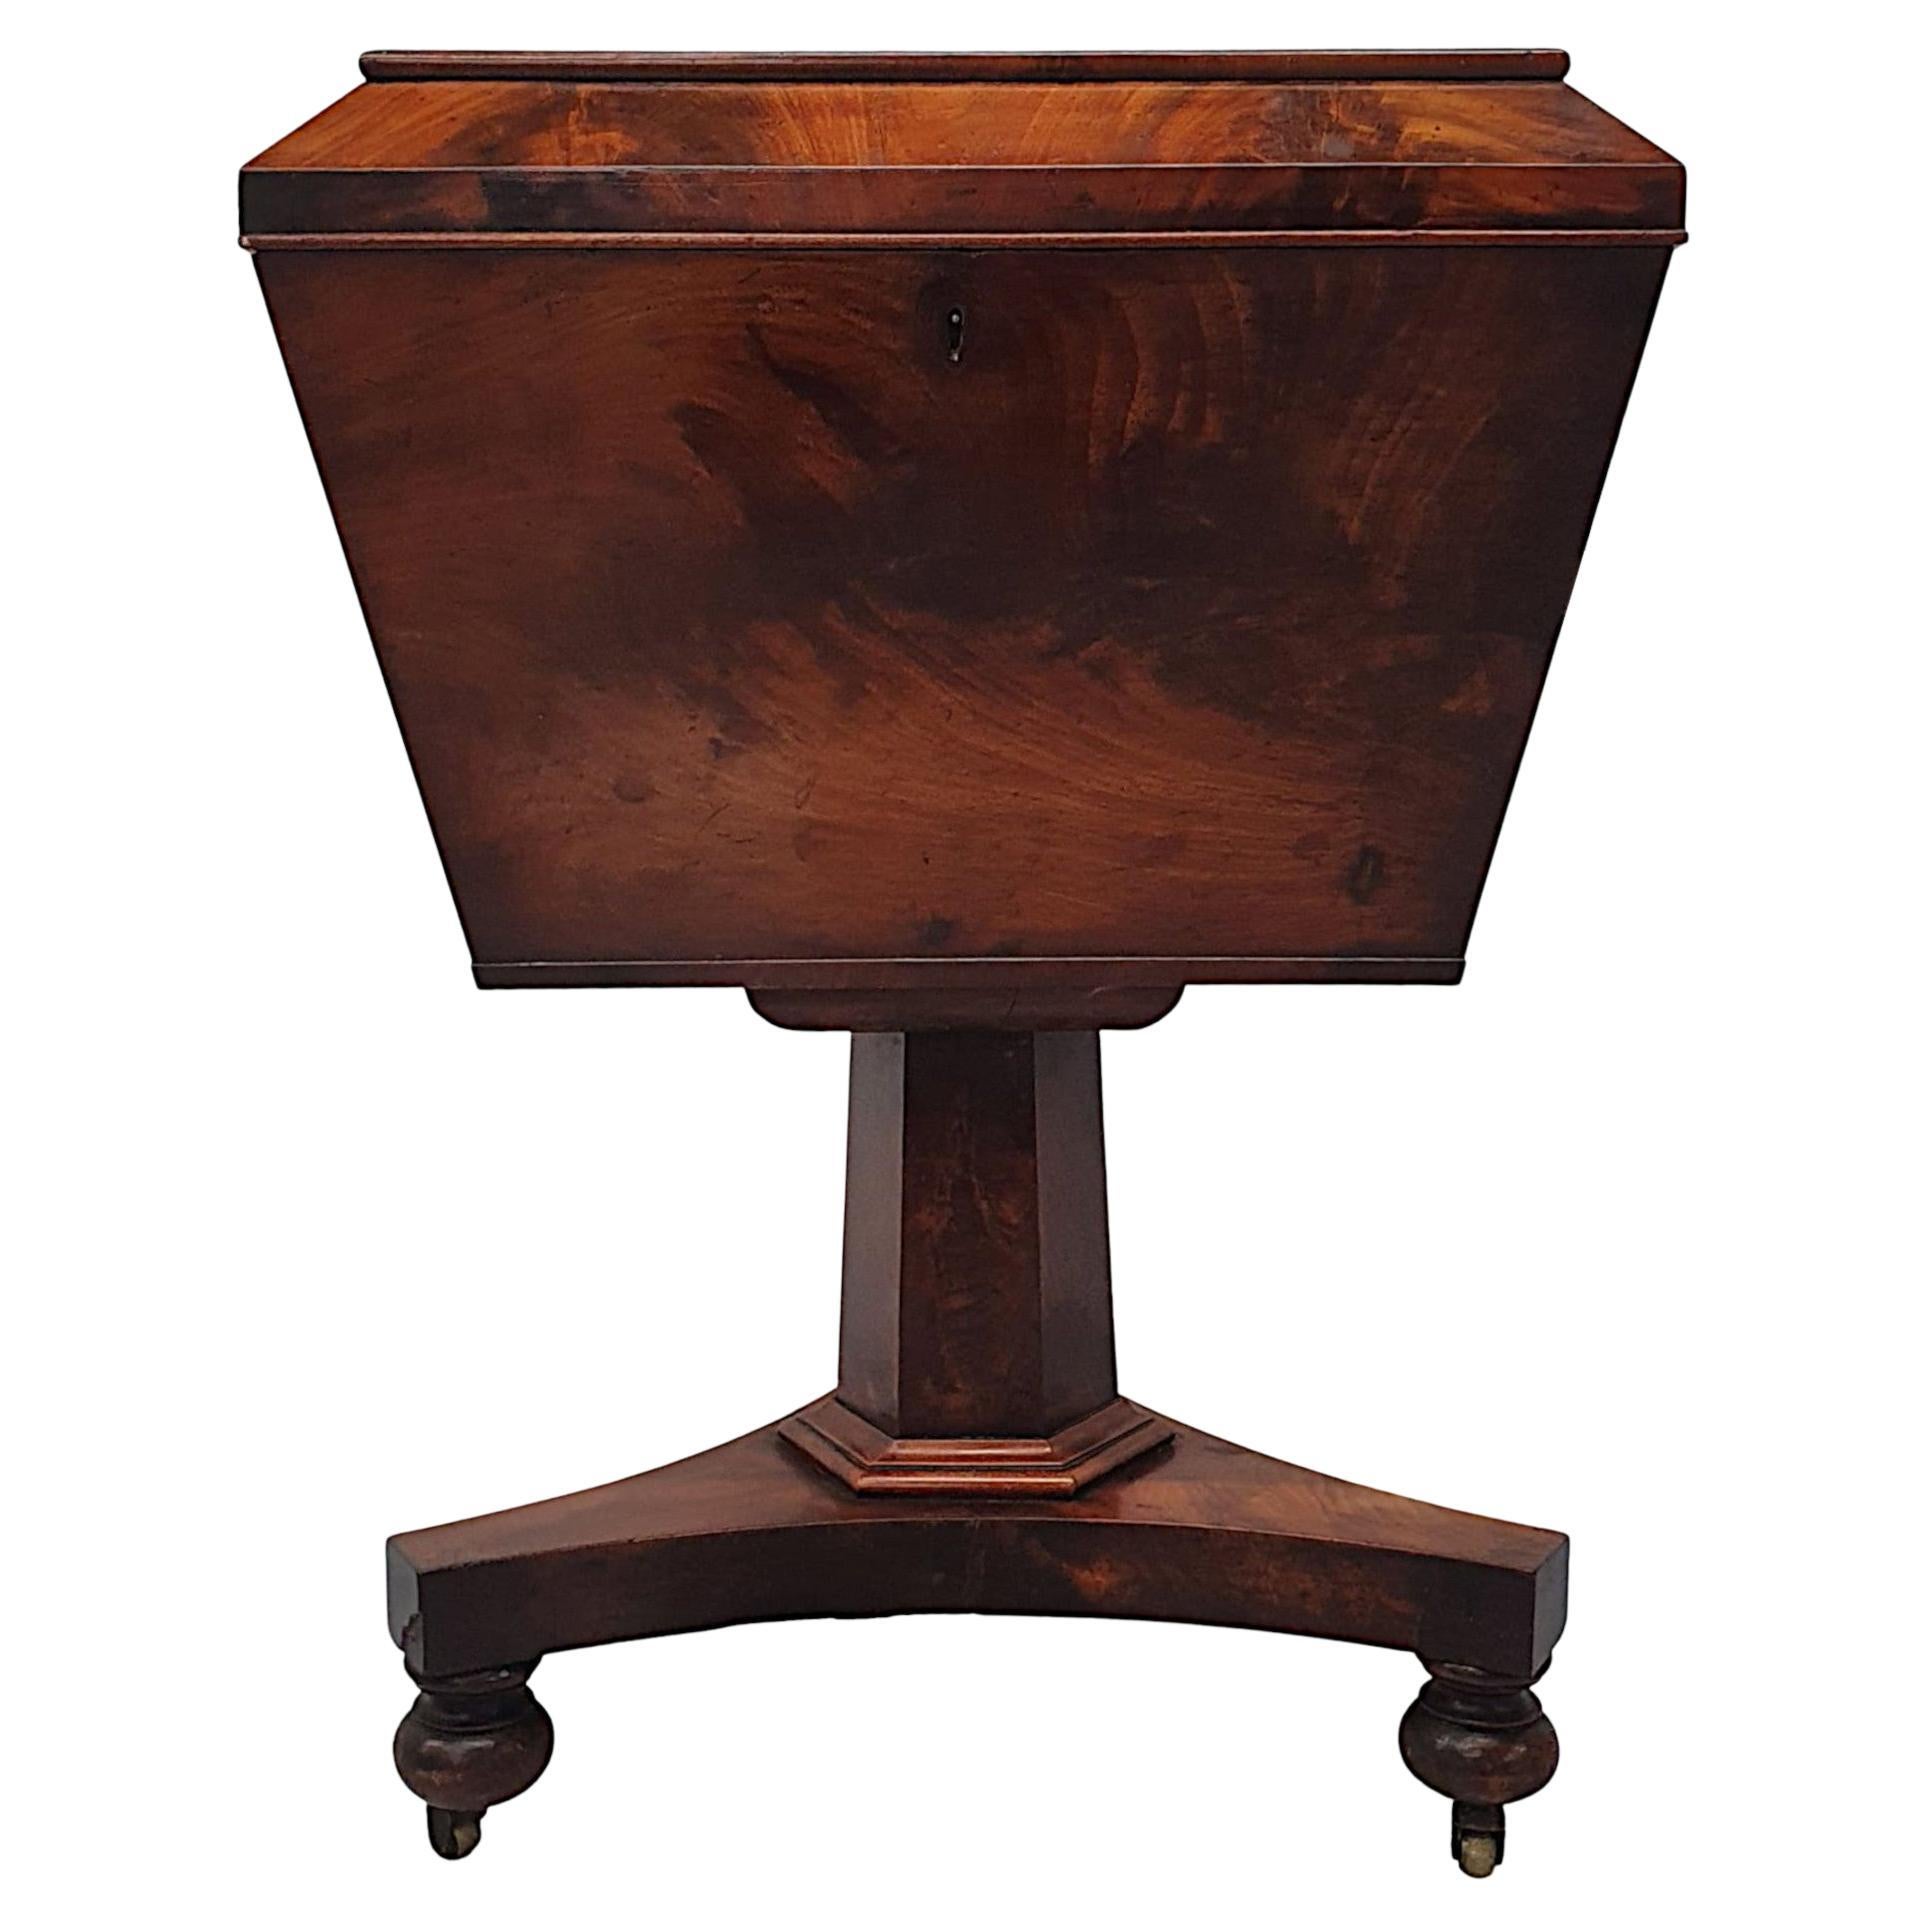 Very Fine Early 19th Century Flame Mahogany Cellerette For Sale